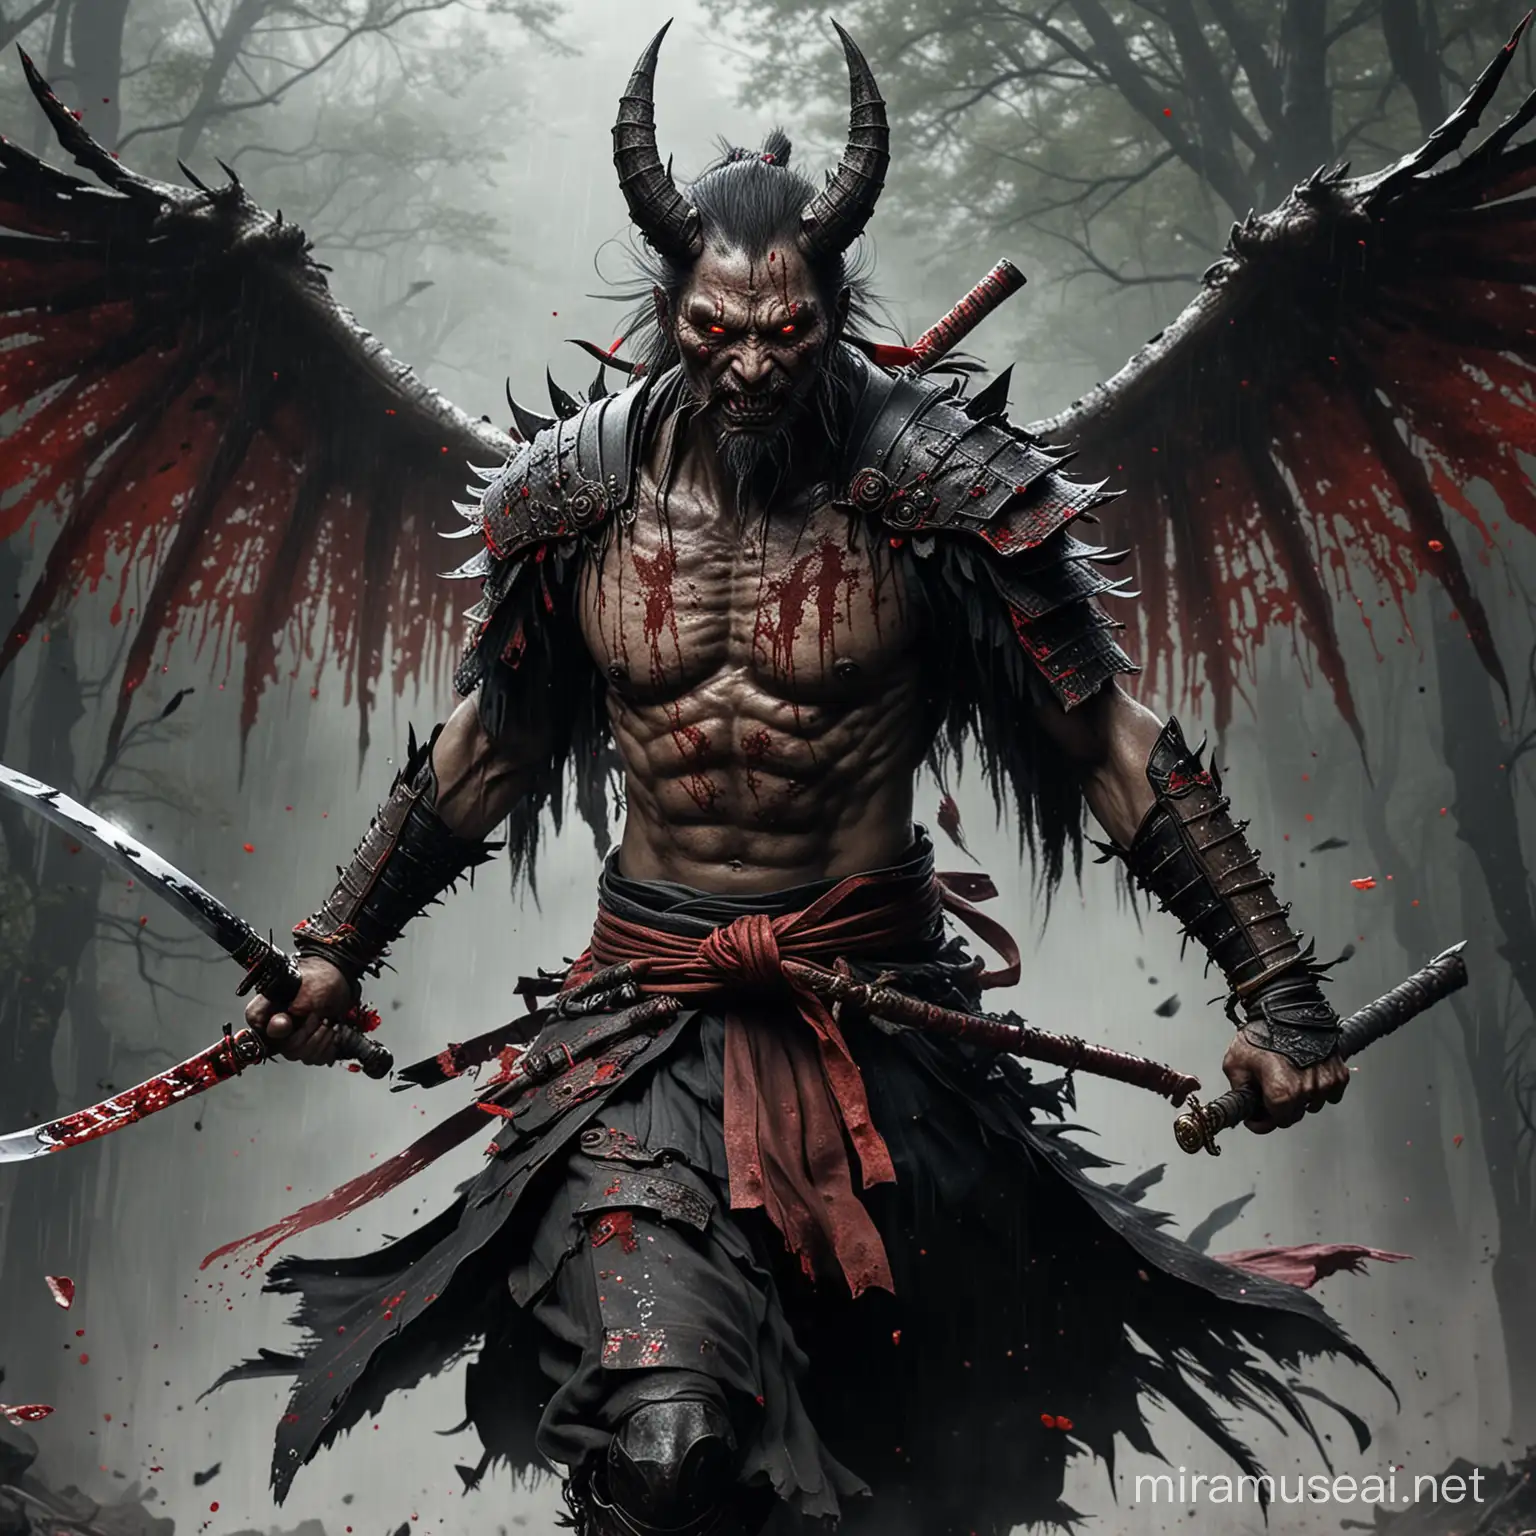 Menacing Samurai Demon with Bloodied Wings and Sword in Hand